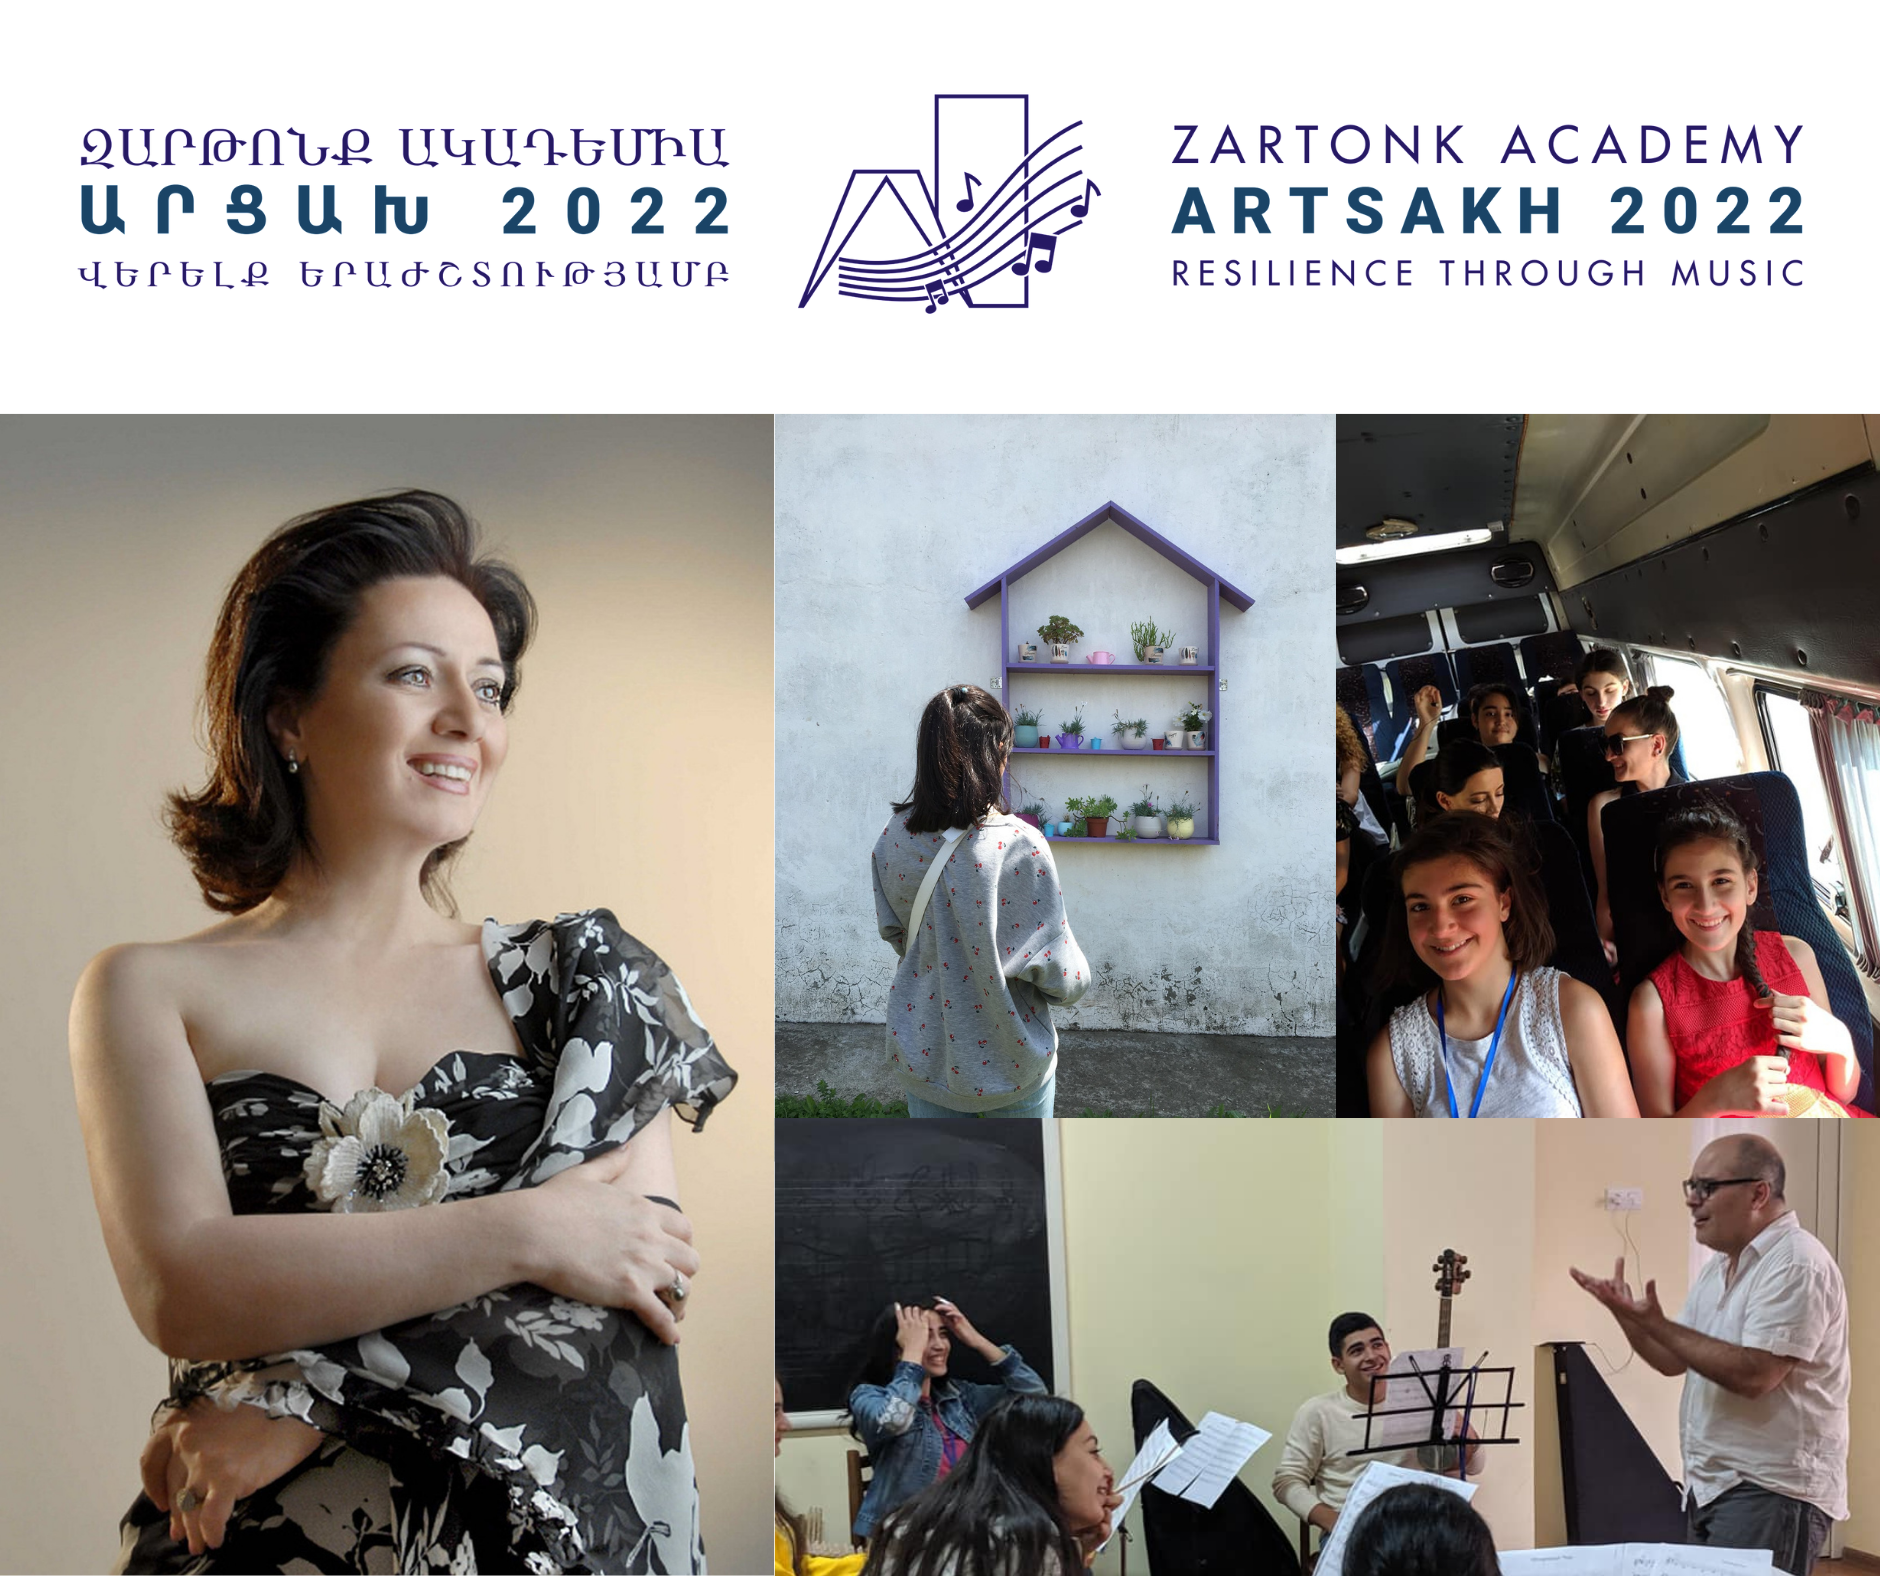 Zartonk Academy - Resilience through music to be held in Artsakh this summer!